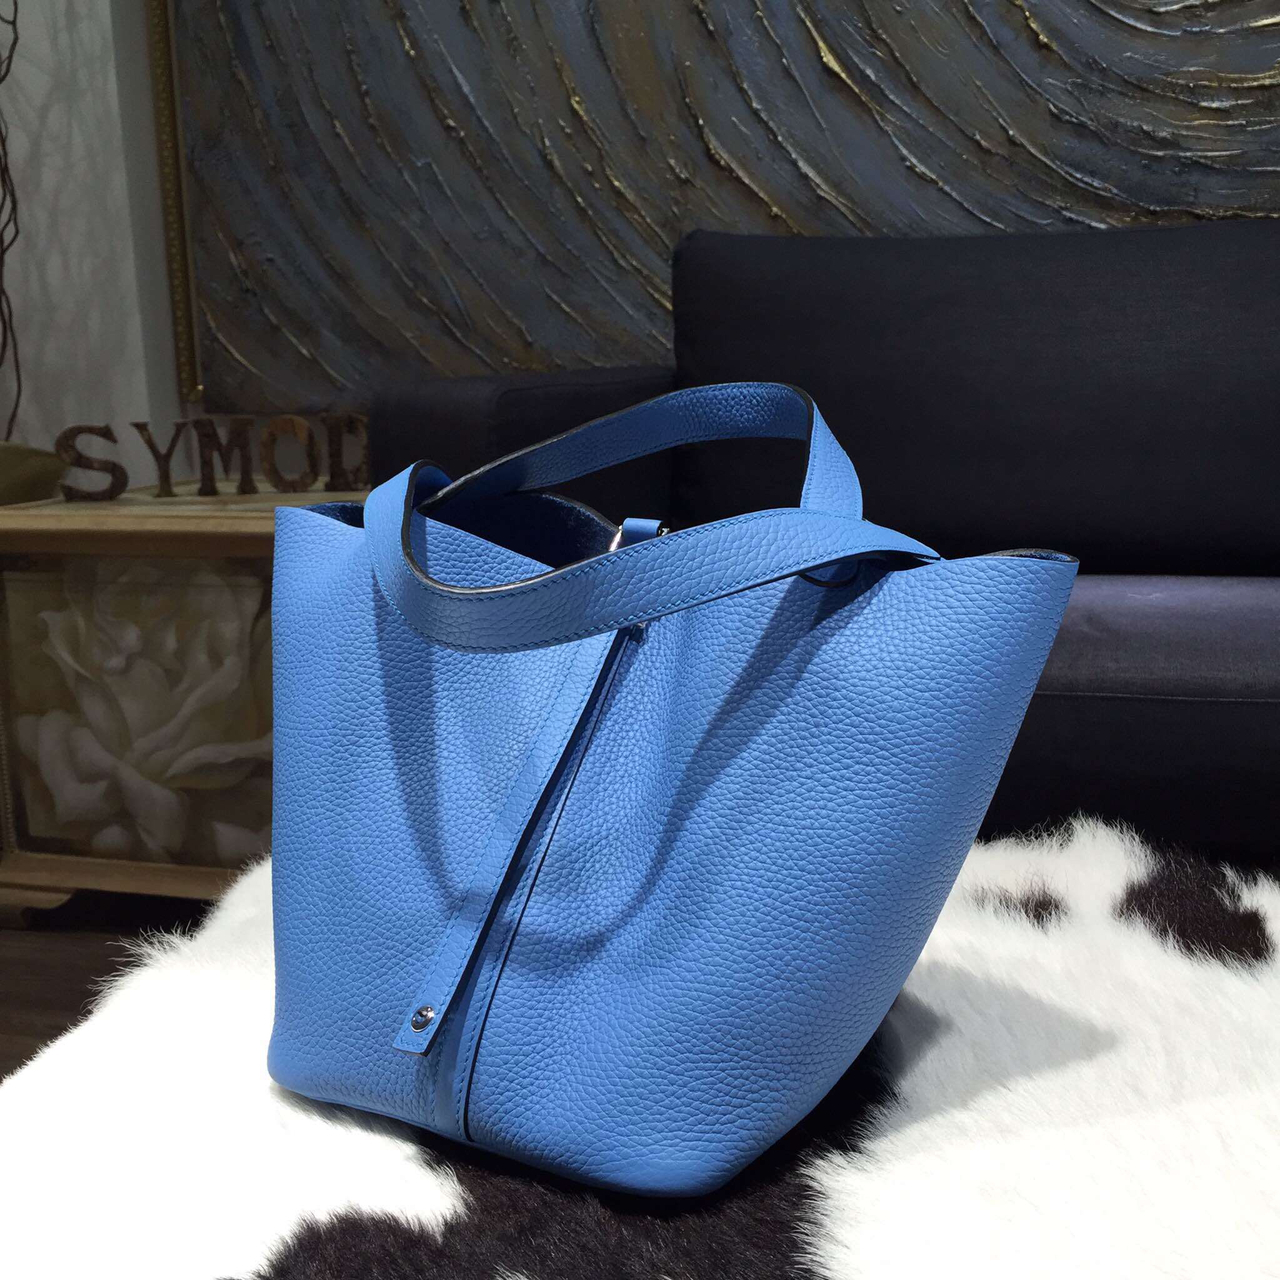 Hermes Picotin Lock 22 Bag Blue Paradise 2T Taurillon Clemence Handstitched